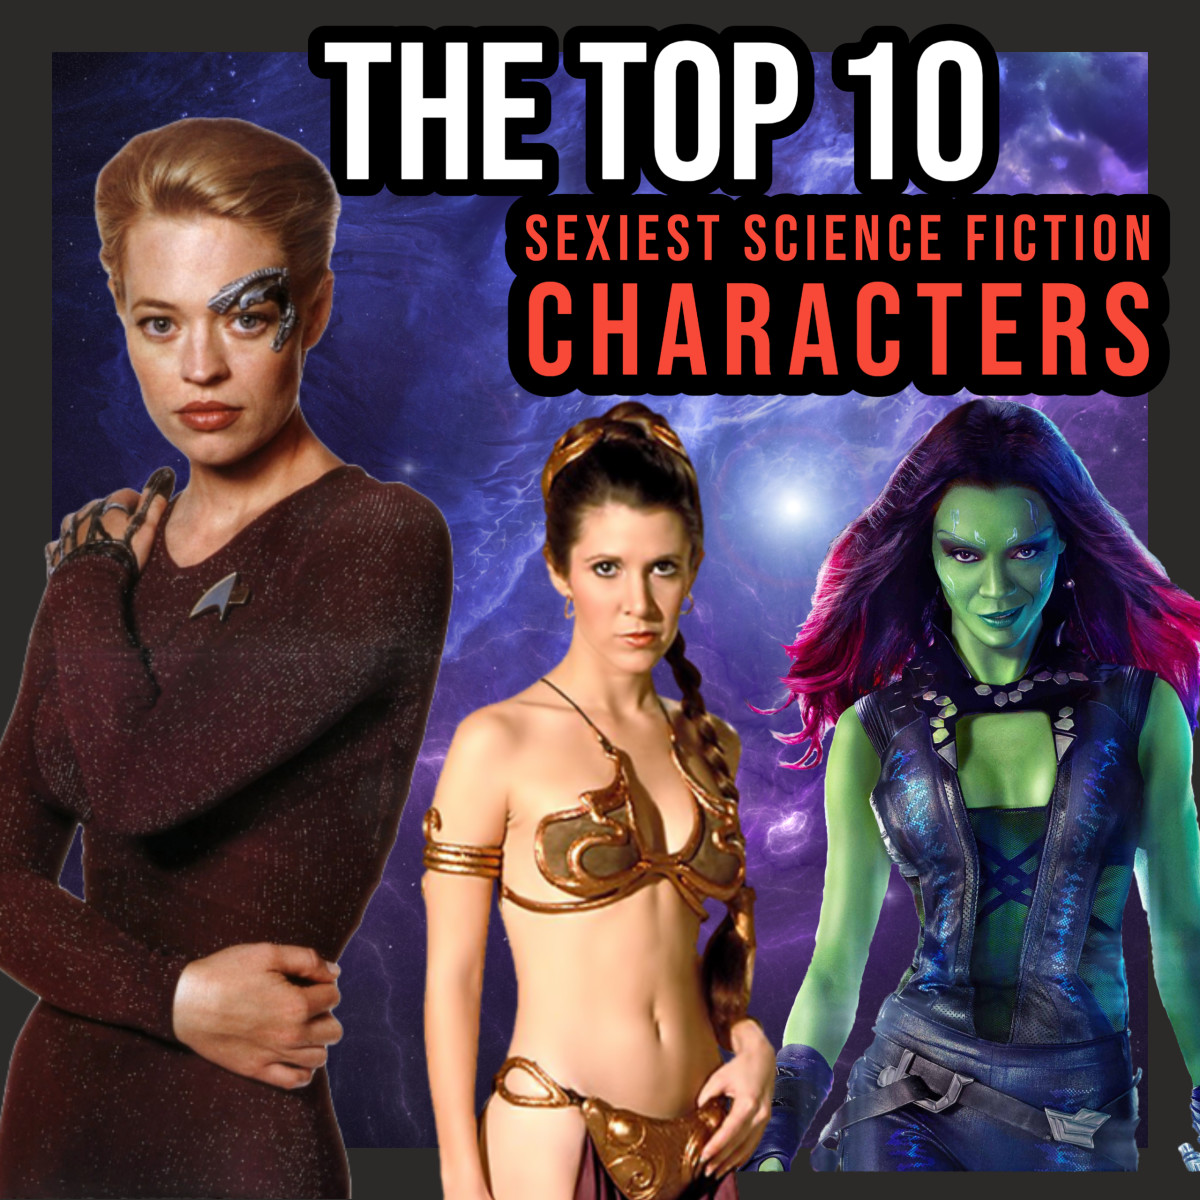 The Top 10 Sexiest Science Fiction Characters